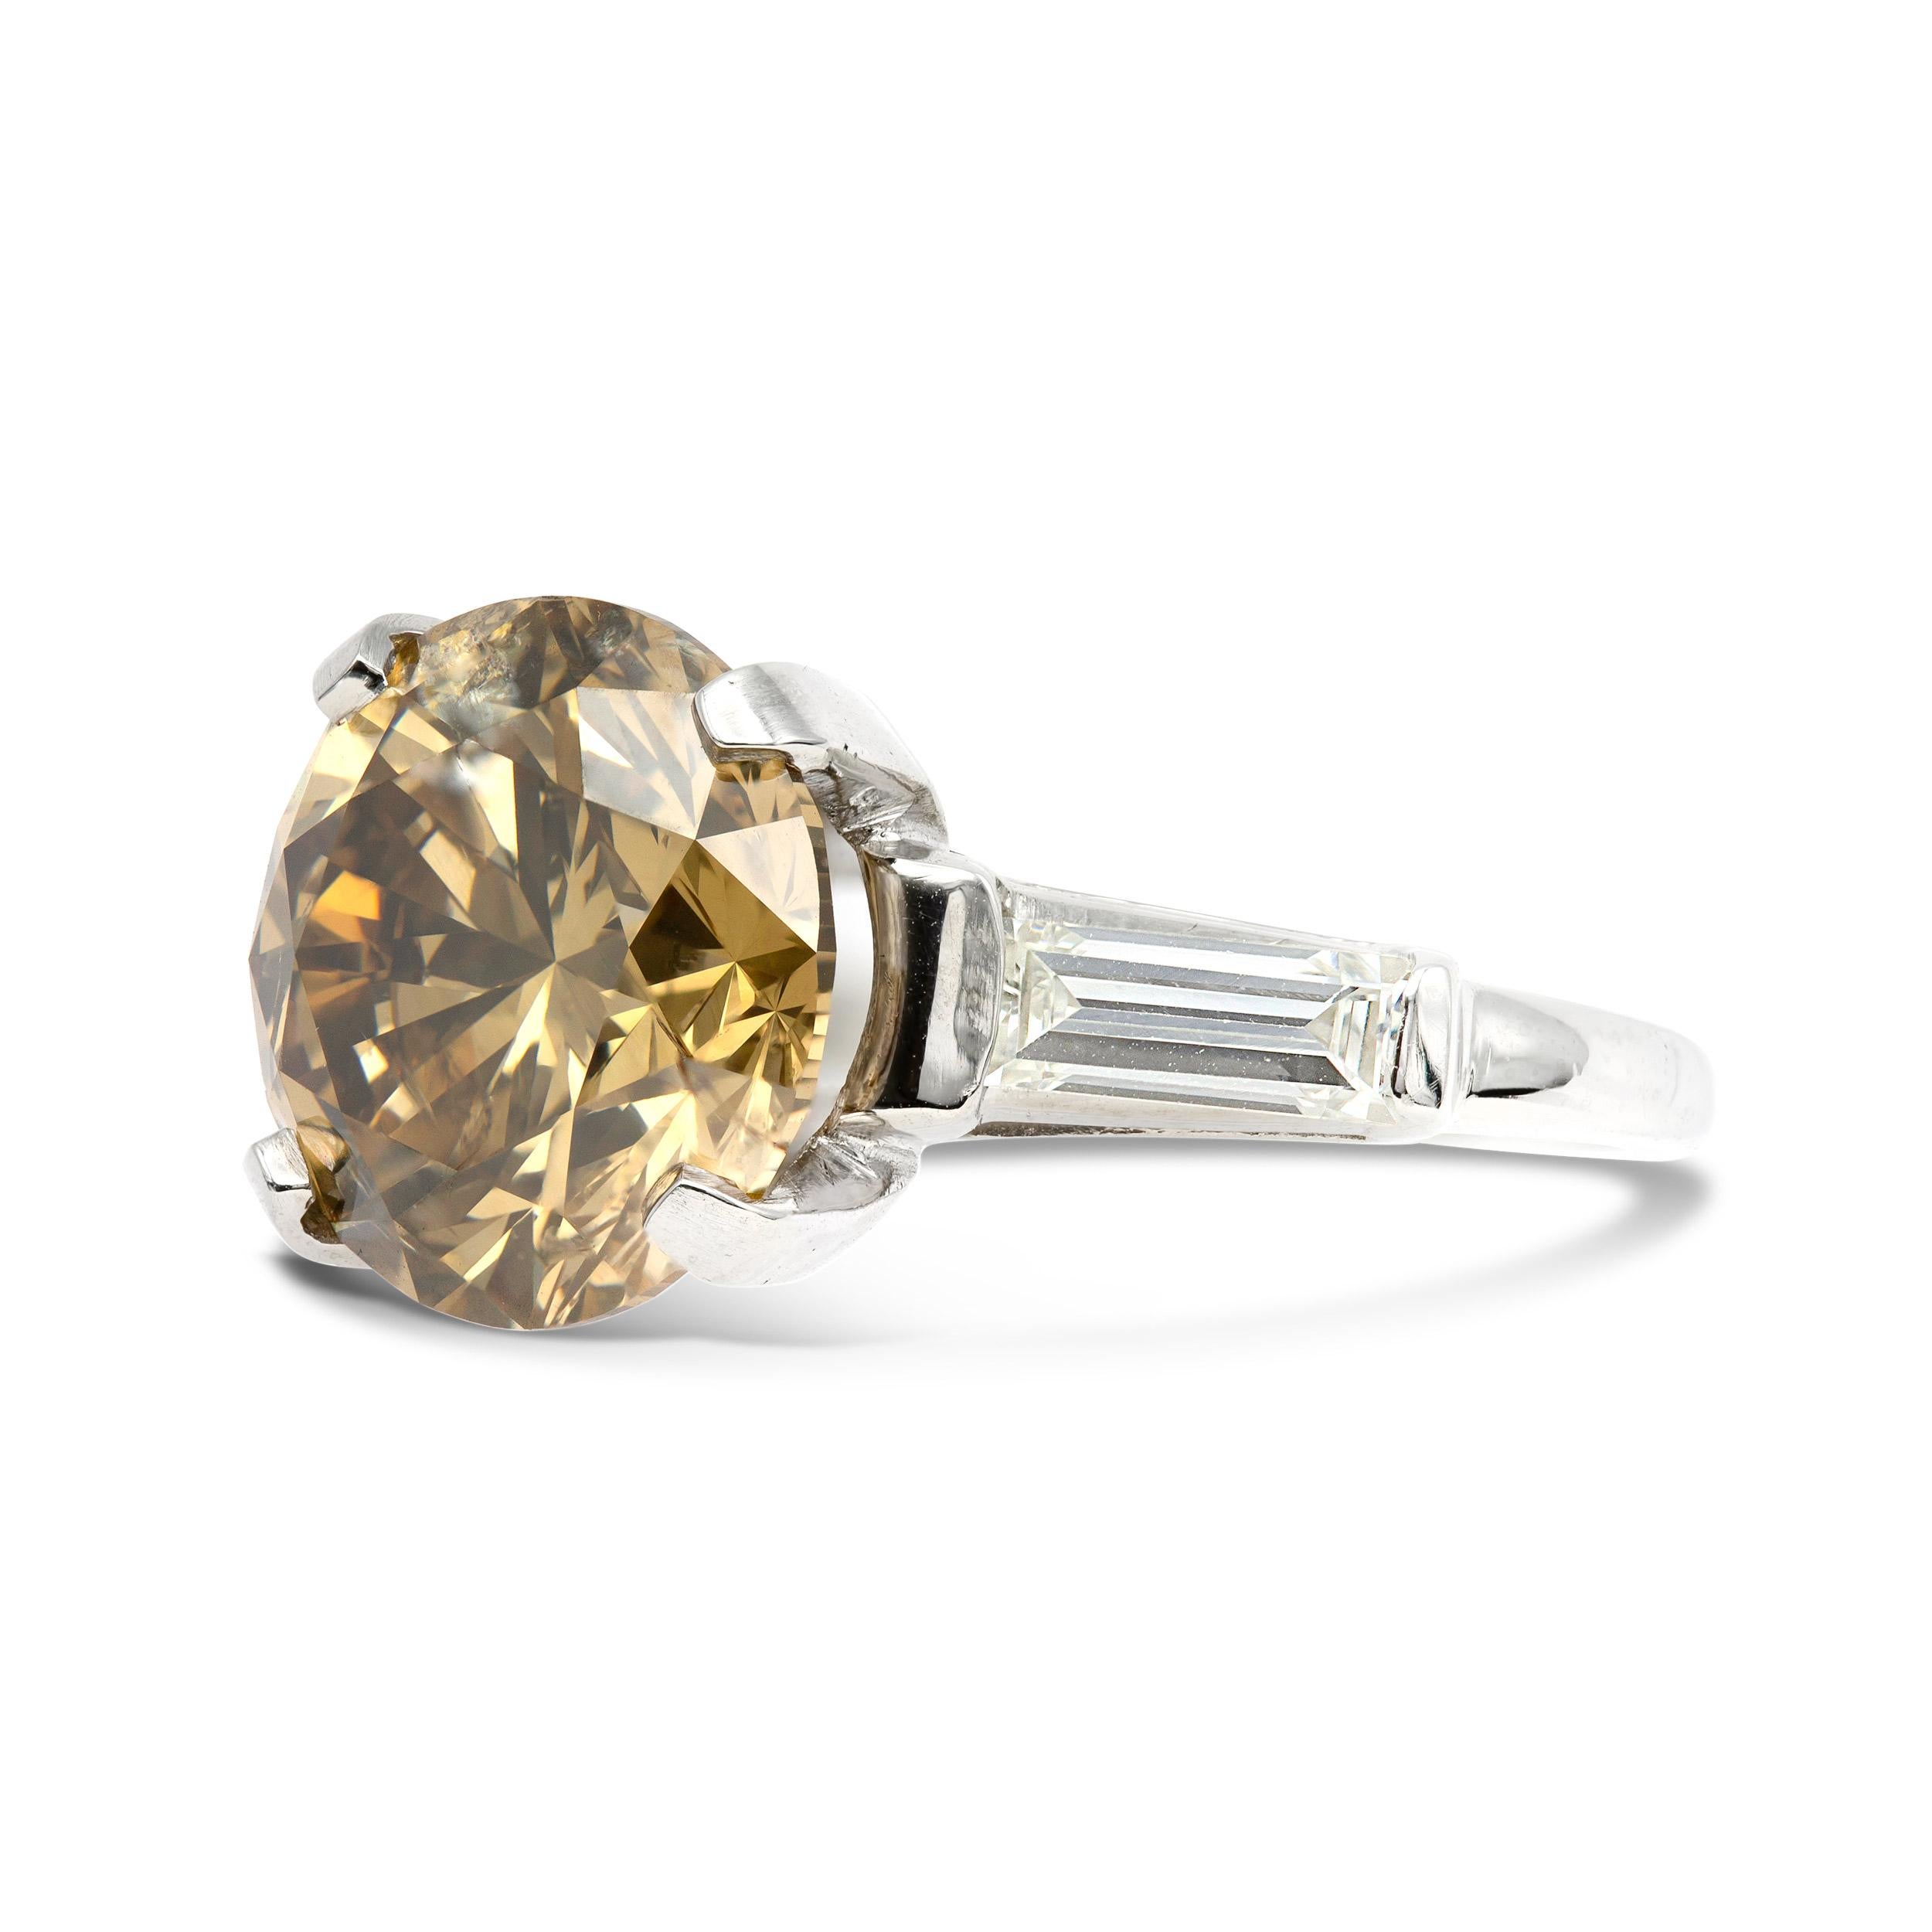 Where classic meets unconventional, this impressive 5.35 carat Fancy Yellow-Brown centered ring is a complete dream. The warm cognac colored diamond is set in a four-prong basket, accented by two sleek straight baguettes set in platinum. This ring